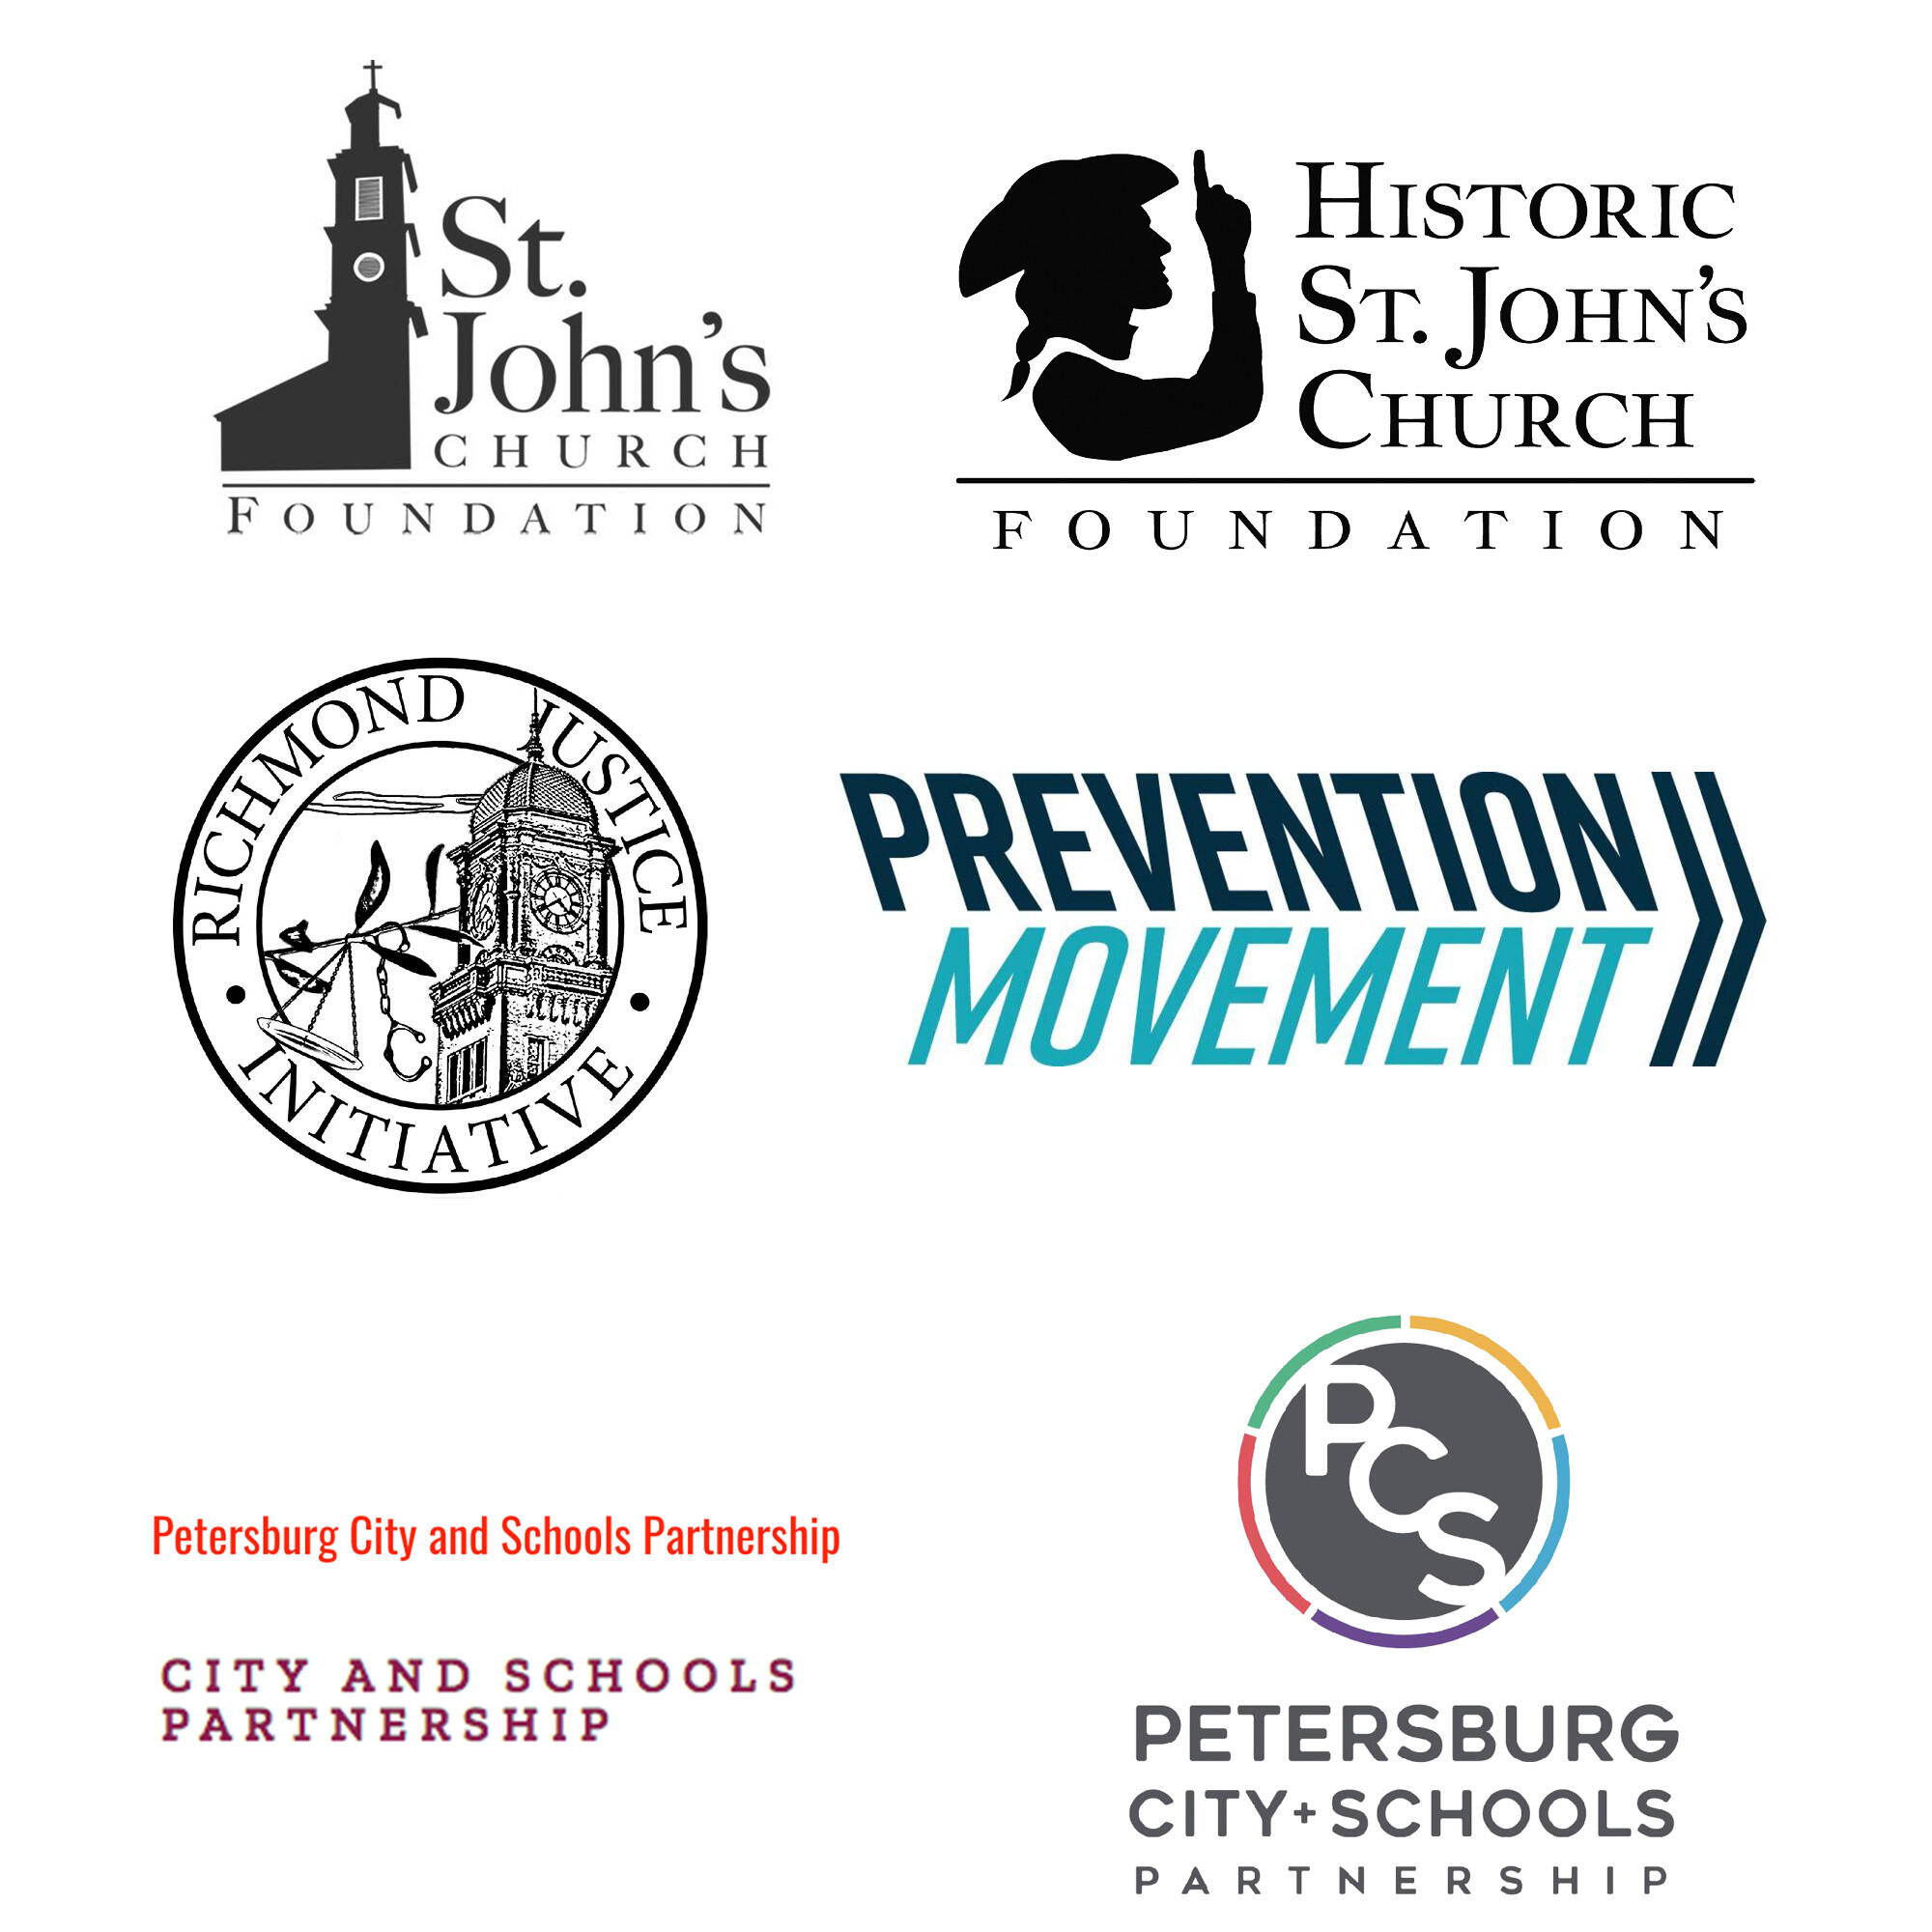 Before and after logos created during Creatathon. Top: St. John's Church Foundation. Center: Richmond Justice Initiative/Prevention Movement. Bottom: Petersburg City and Schools Partnership.